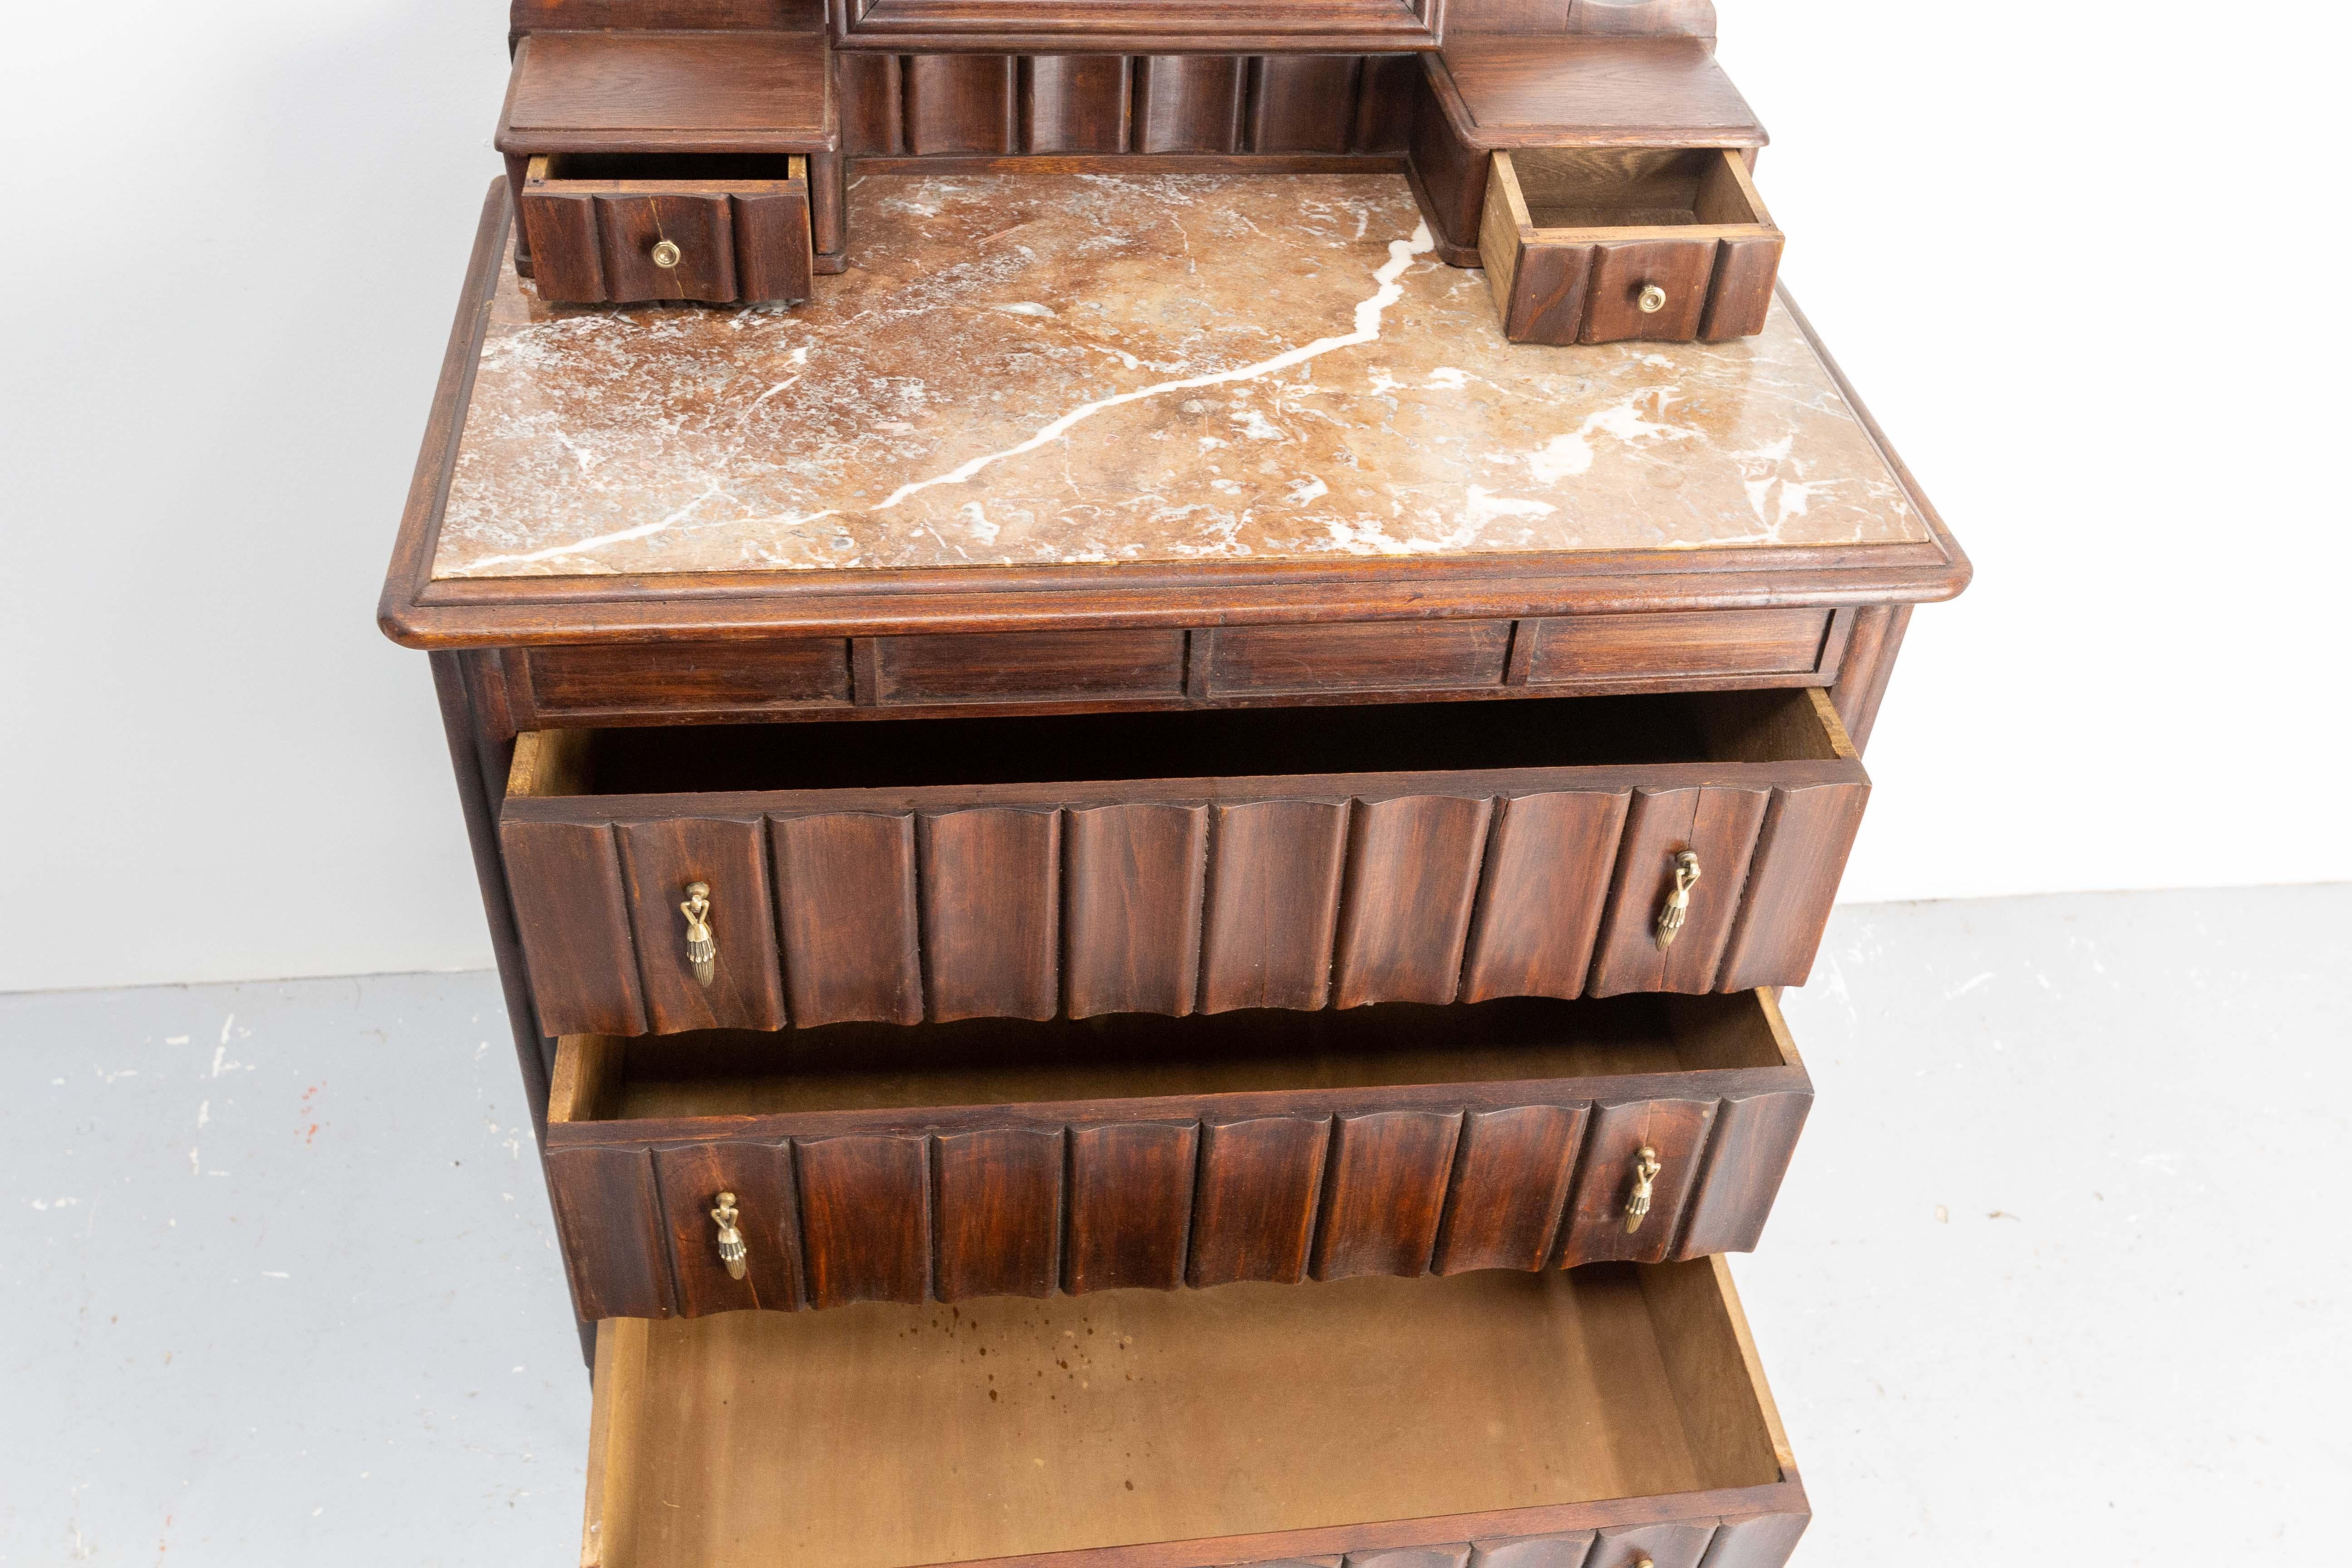 Mid-20th Century French Art Deco Dressing Table Vanity Unit with Drawers Marble & Mirror, c. 1930 For Sale